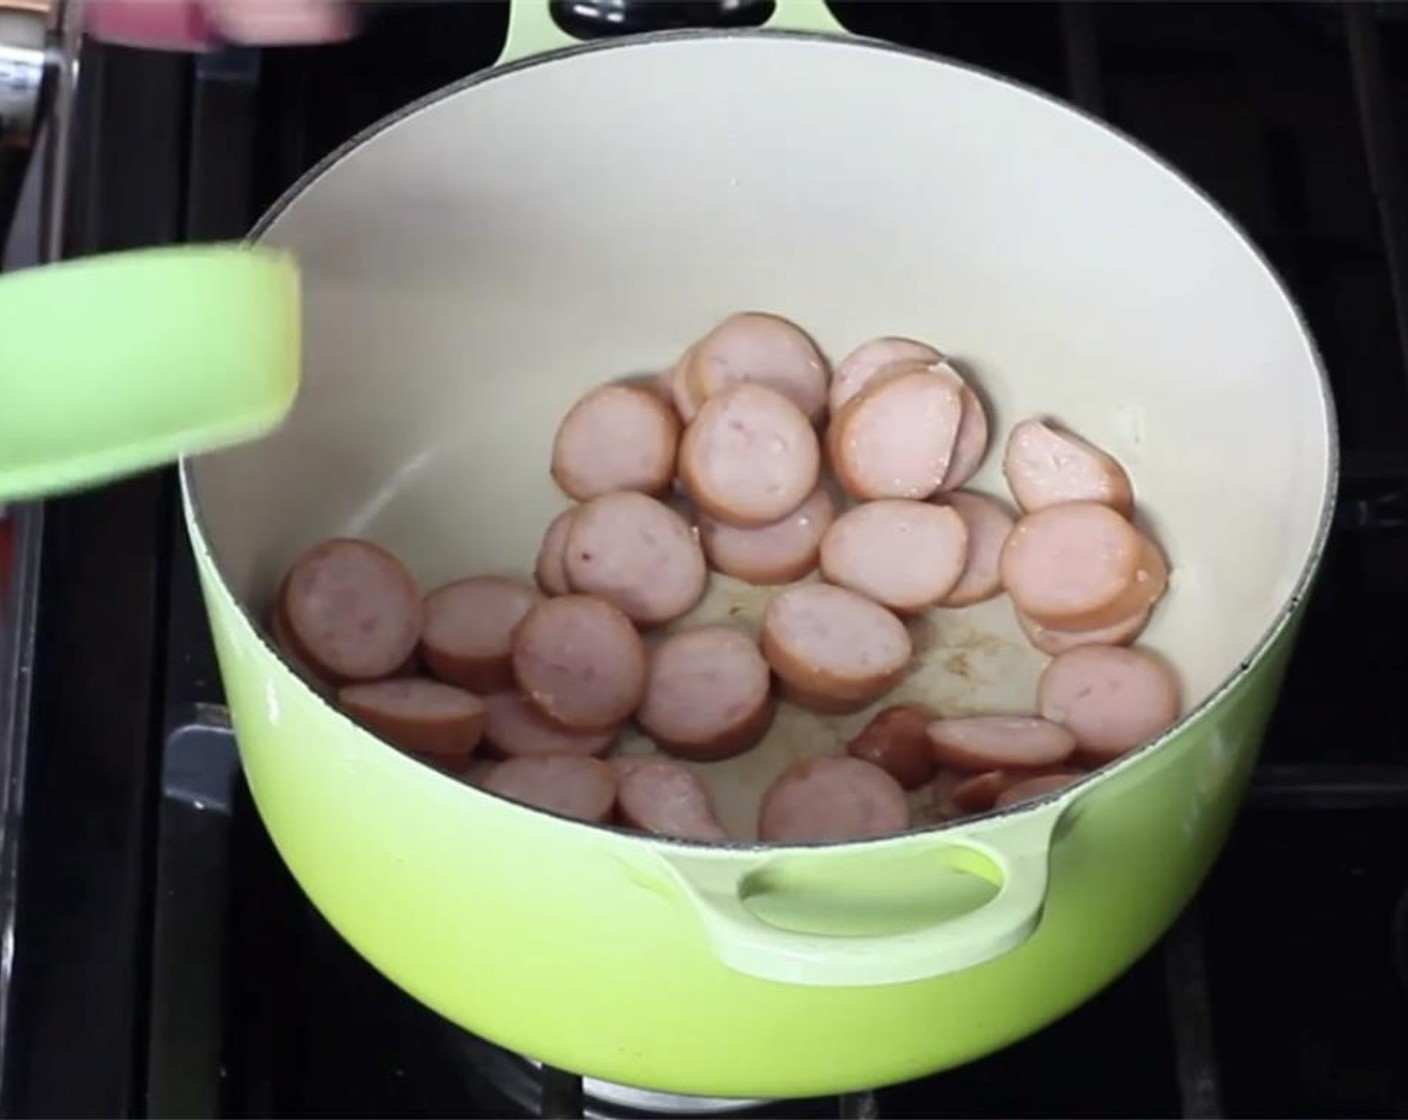 step 5 In a pot, brown your sliced sausage. Once browned, transfer to a plate and set aside.